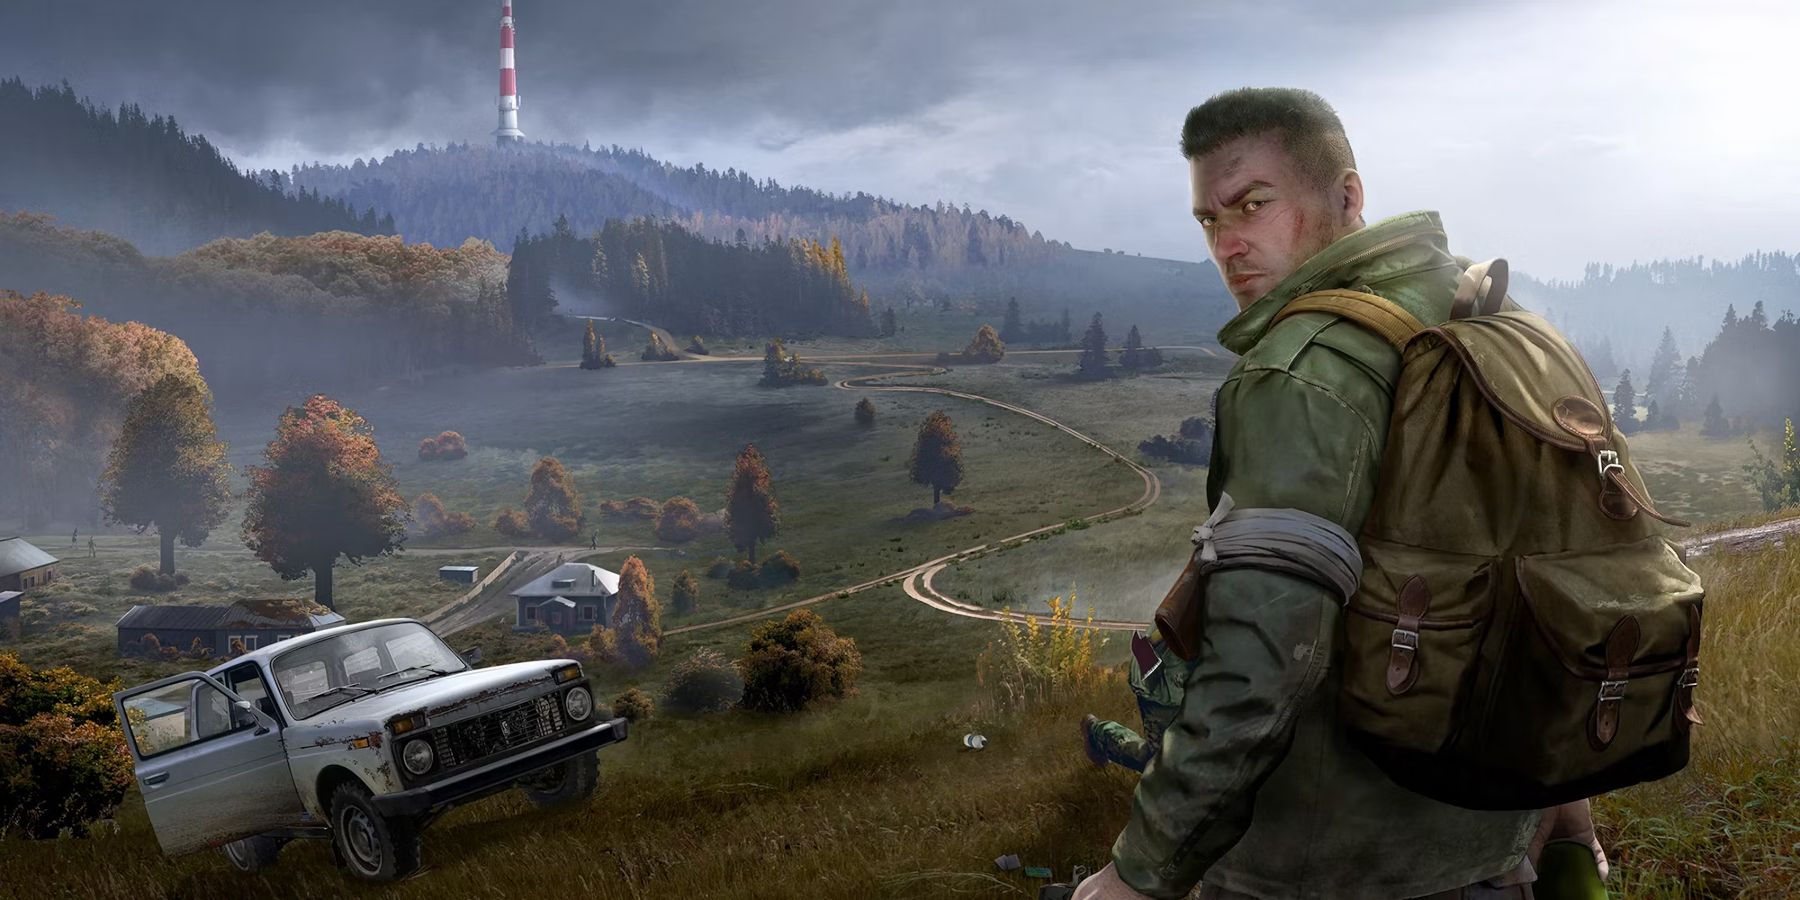 DayZ 2 confirmed as part of court battle between Microsoft and FTC - Xfire